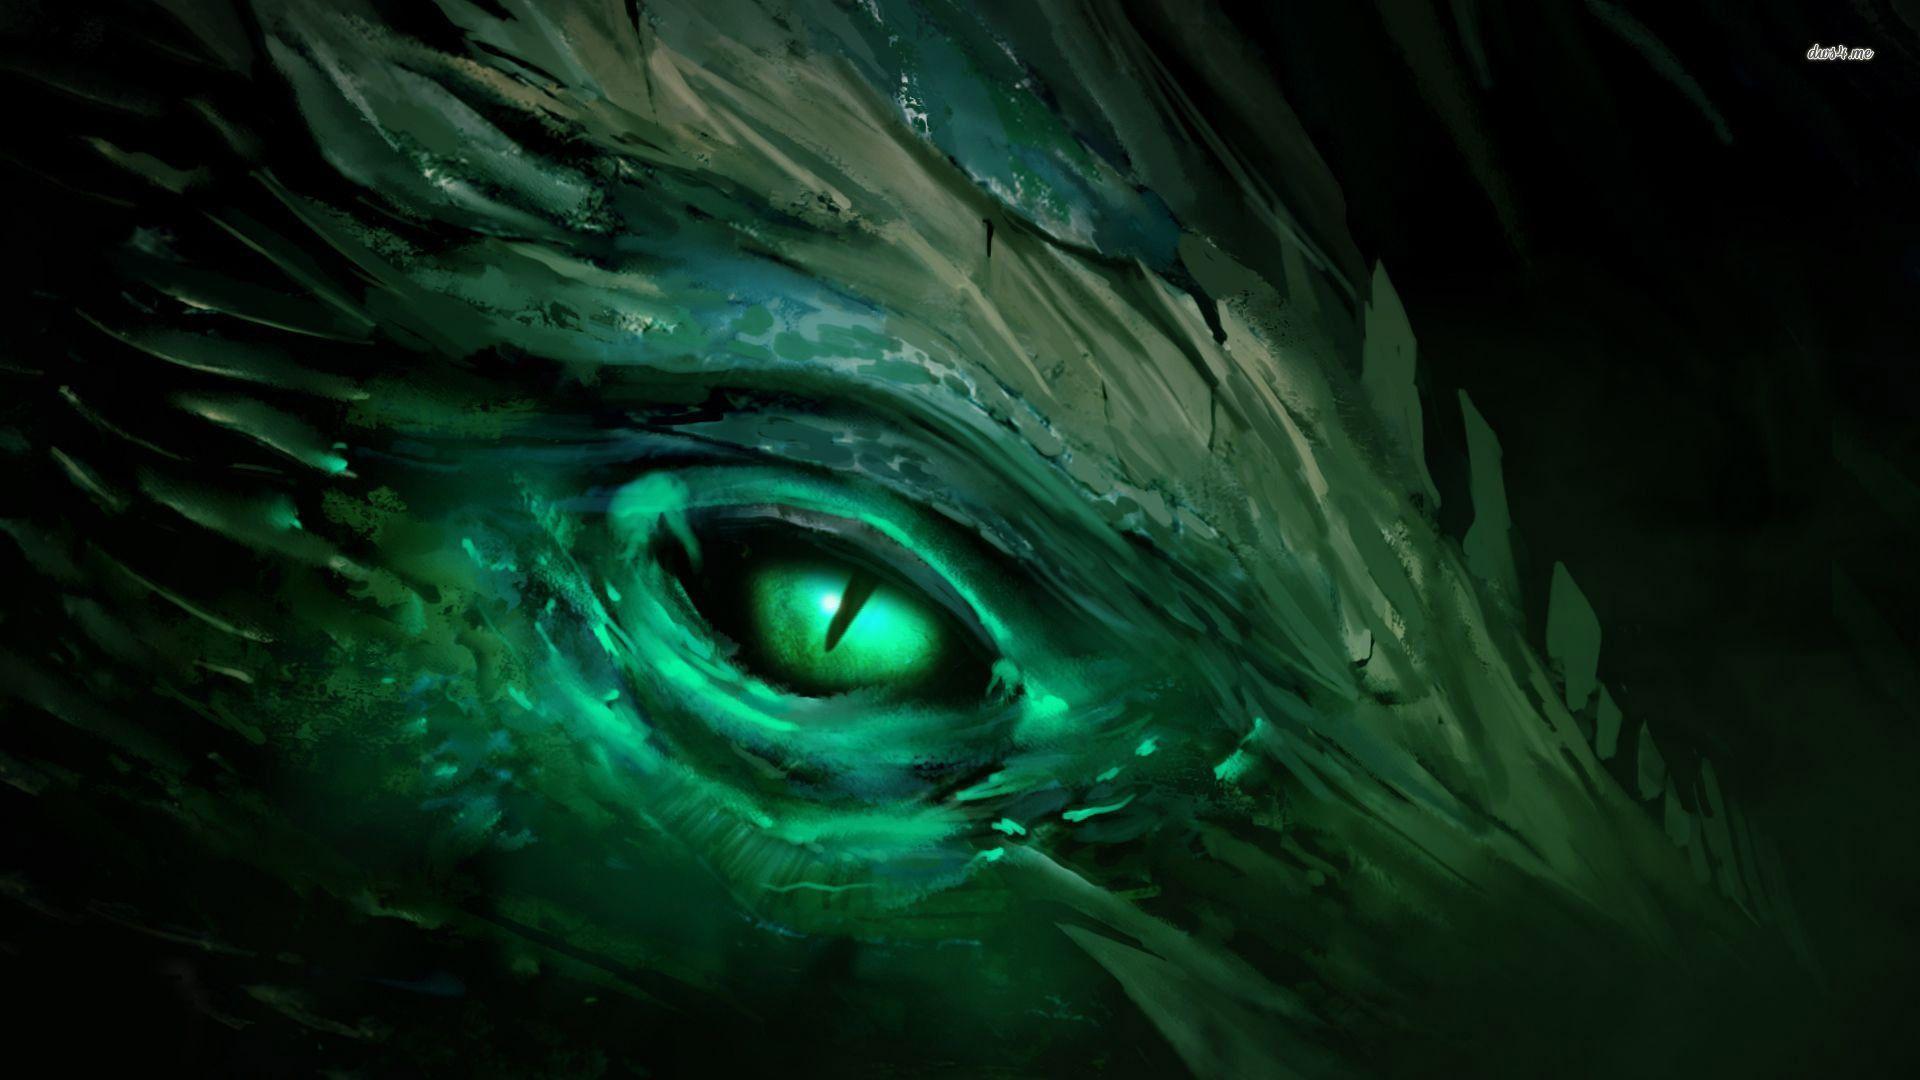 Free Download Green Dragon Wallpapers 1920x1080 For Your Desktop Mobile Tablet Explore 75 Green Dragon Wallpaper Free Green Dragon Wallpaper